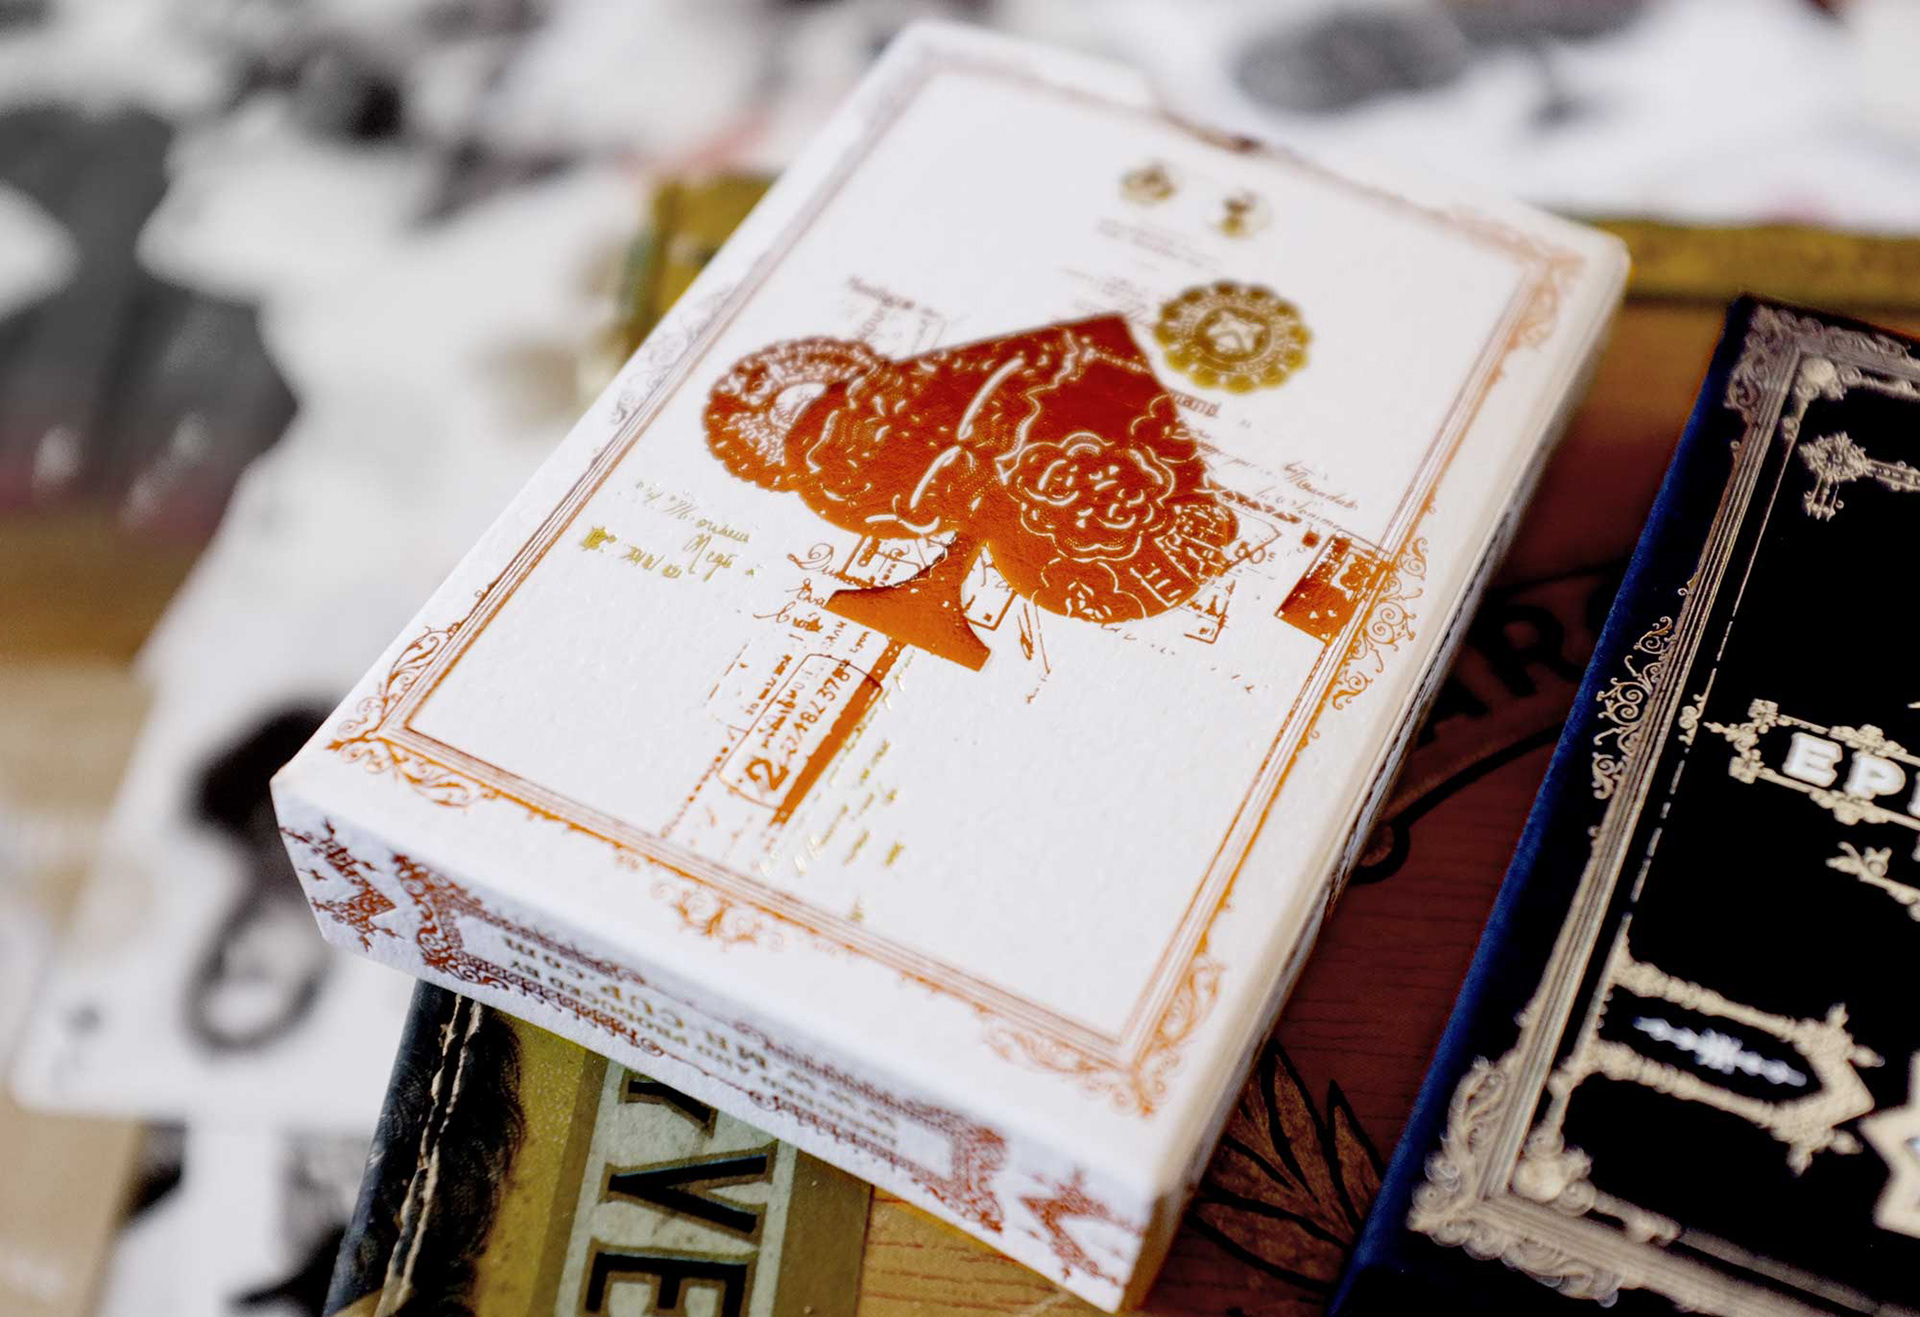 Cup Details about   Ephemerid Metal Edition Playing Cards Gold Edition by Mr show original title 